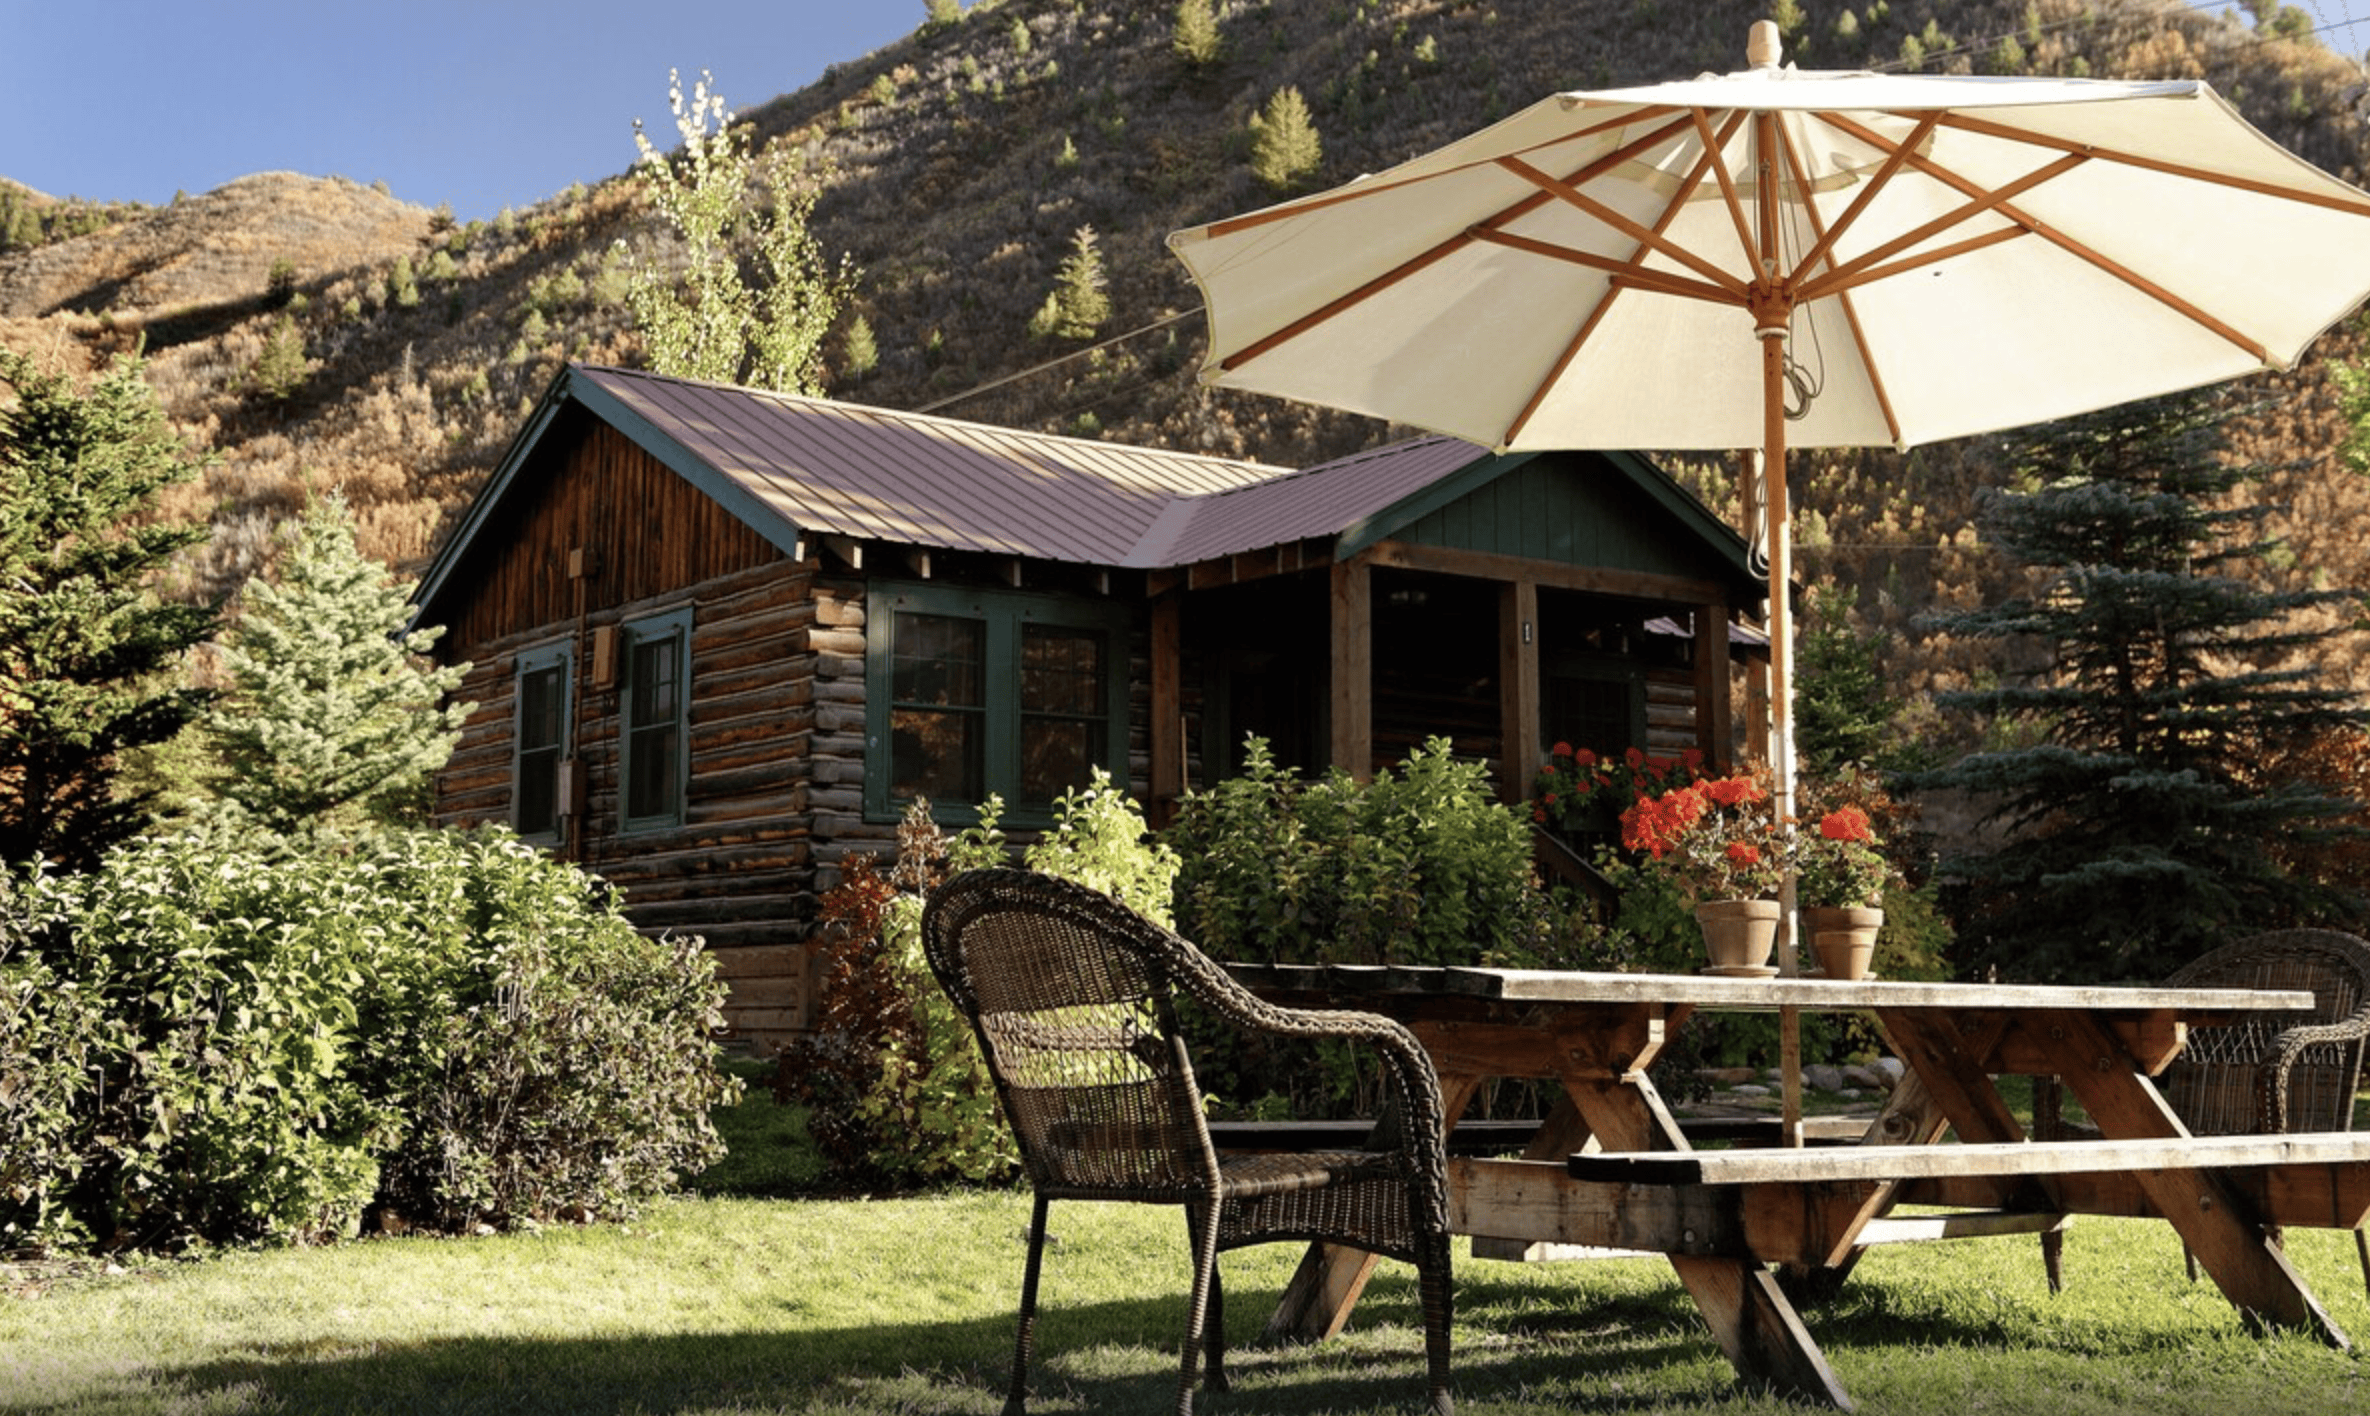 Heart of the Roaring Fork River cabin